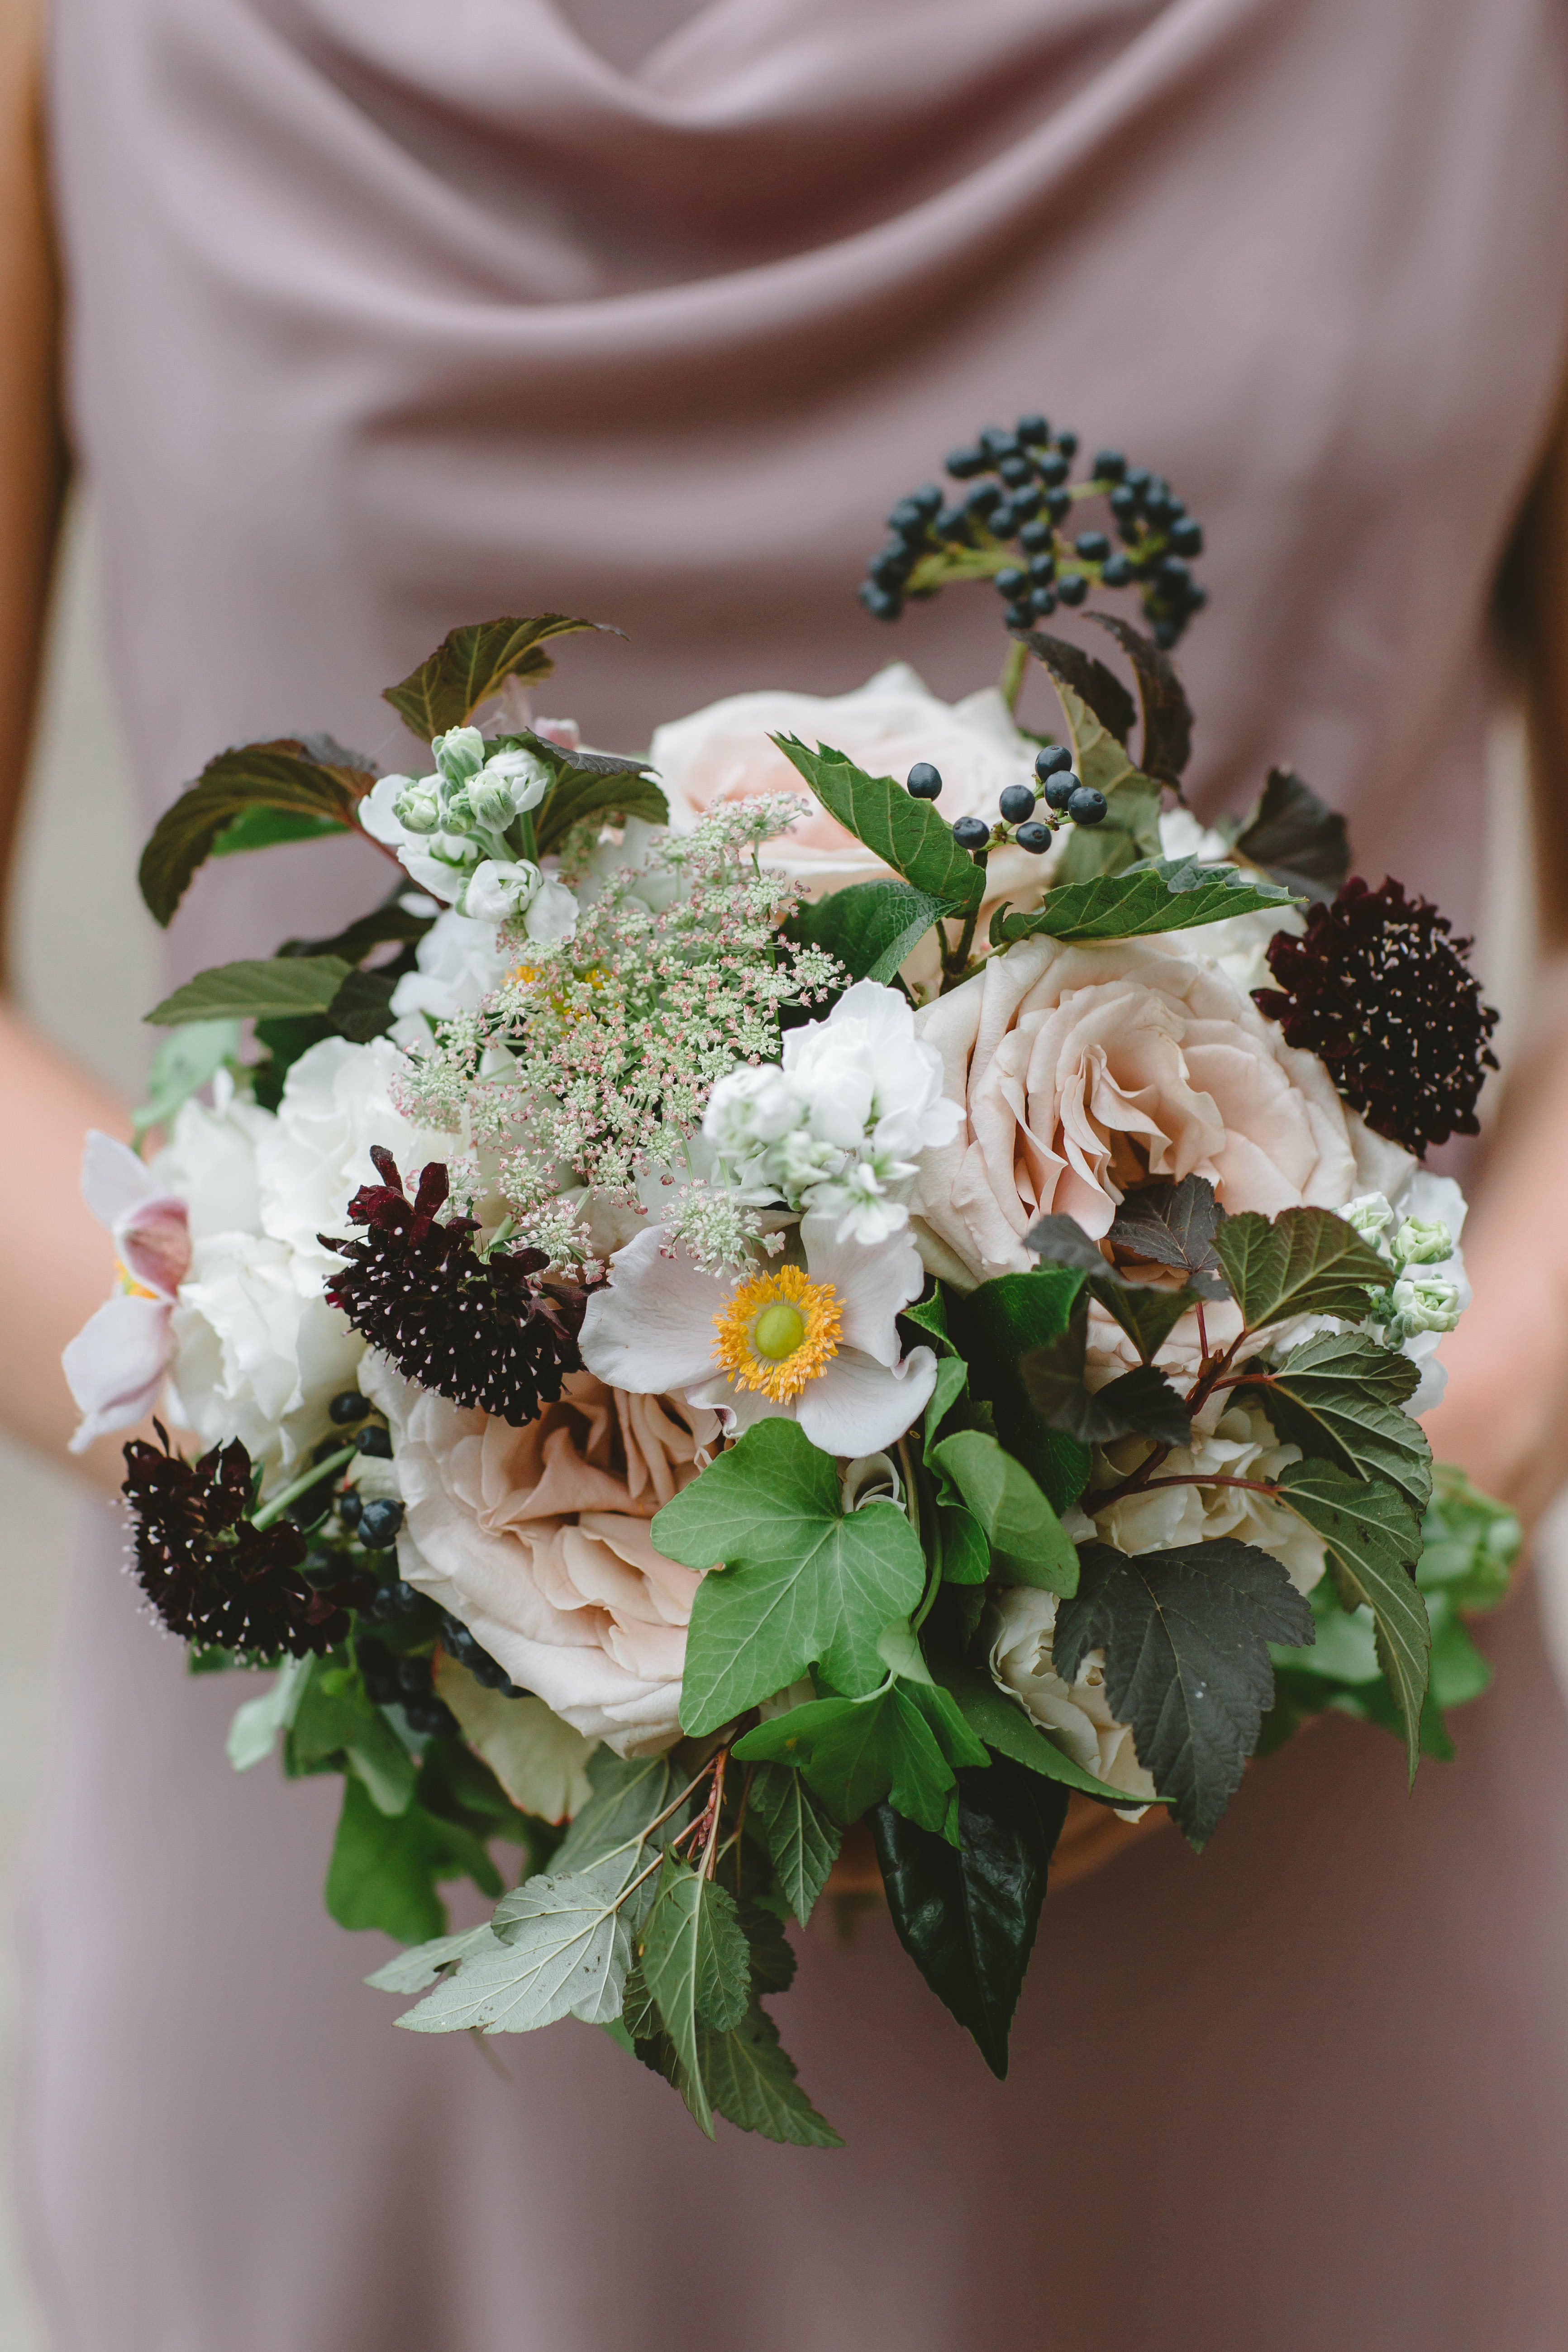 Summer bridesmaid bouquet and Jenny Yoo dress in fig. Bouquet flowers in blush, burgundy, navy, green, white, and mauve.